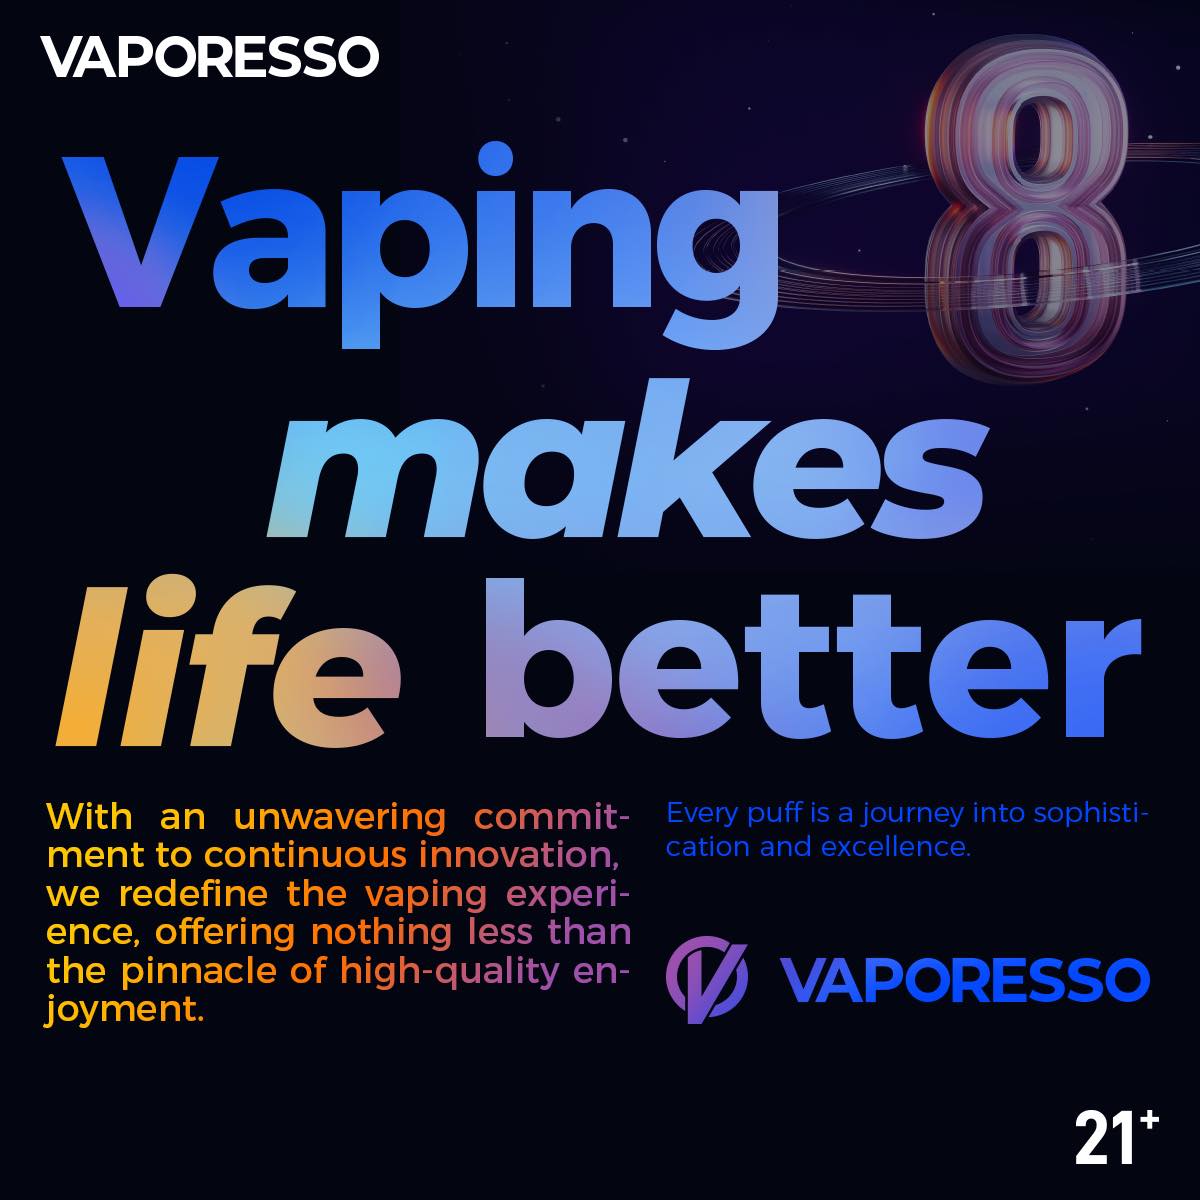 Vaporesso Vaping Review: Flavorful, Fun, and Unforgettable User Experiences Shared